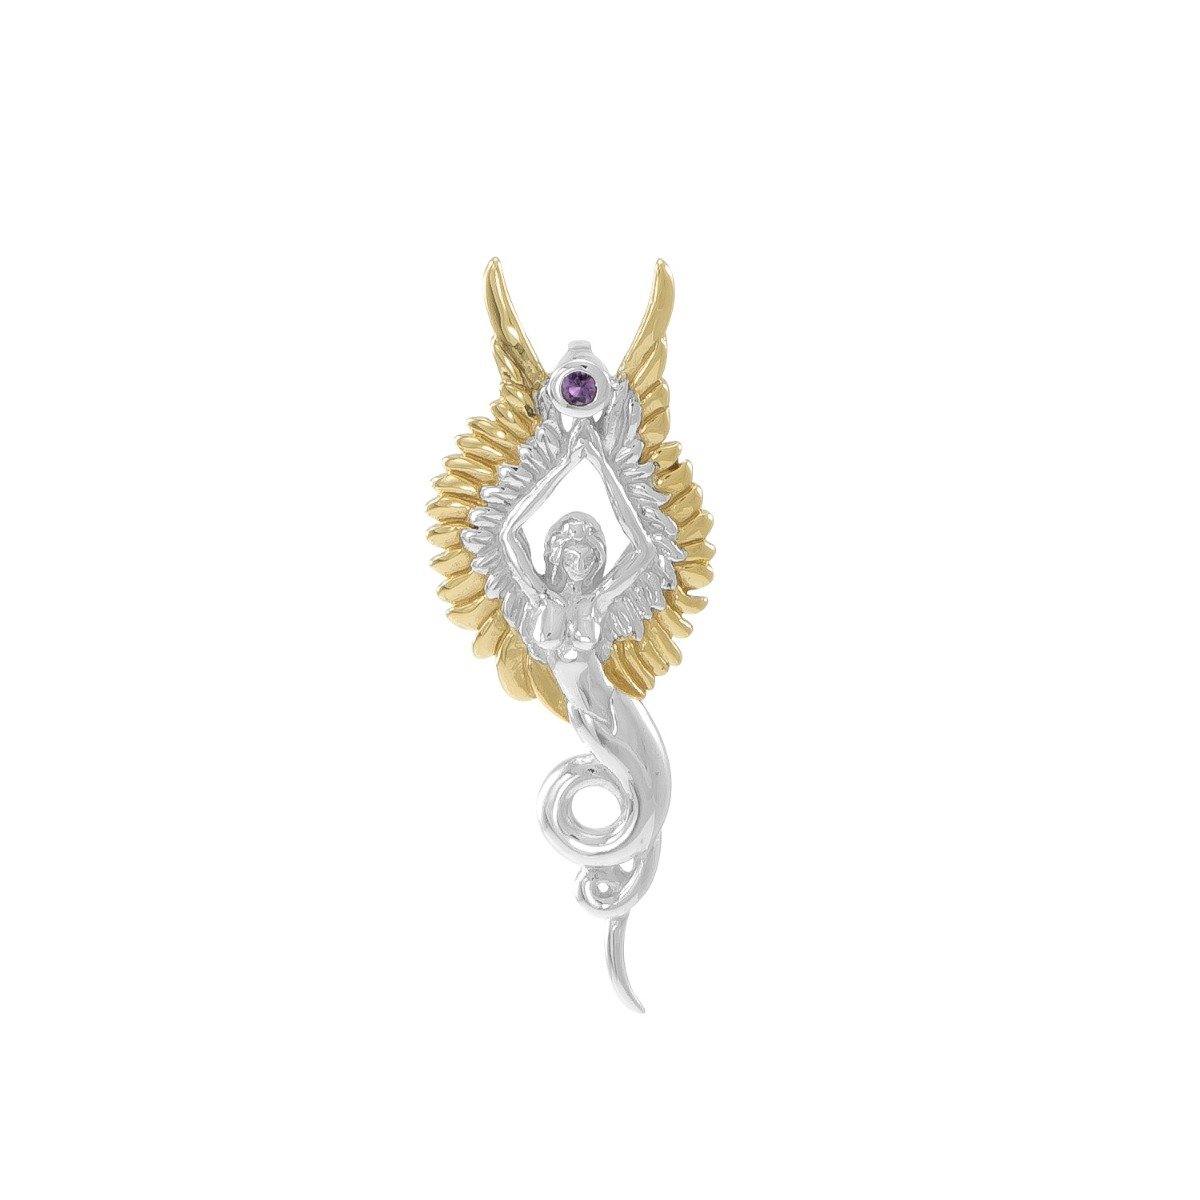 Captured by the Grace of the Angel Phoenix ~ Silver and 18K Gold Accent Jewelry Pendant with Amethyst MPD3266 - Jewelry